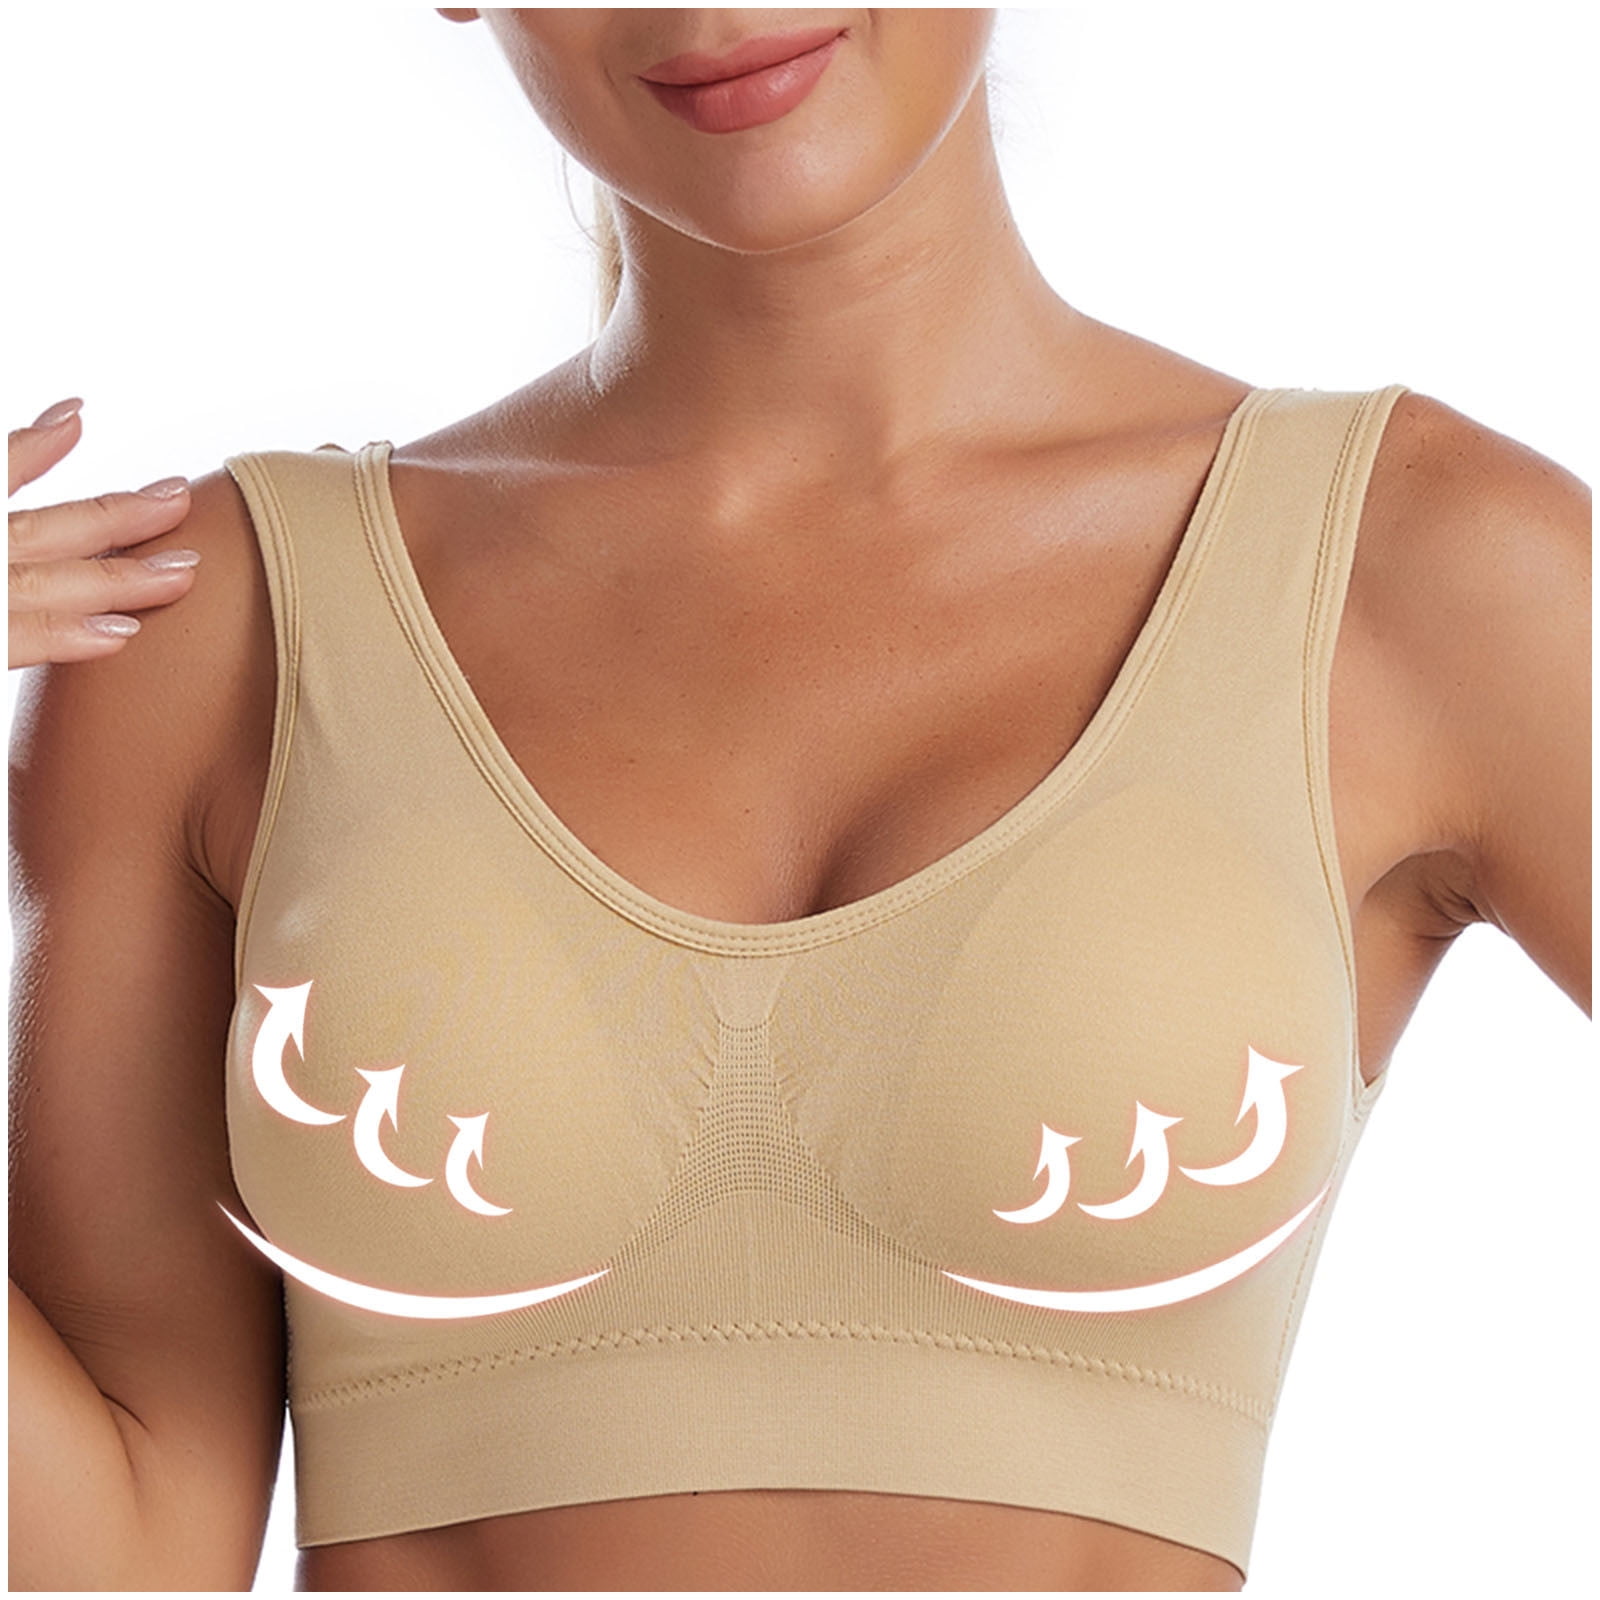 Seamless One Piece Non Wired Bras For Women Intimate, Wire Free, And  Comfortable Underwear For Fashionable Lingerie From Weilad, $13.57